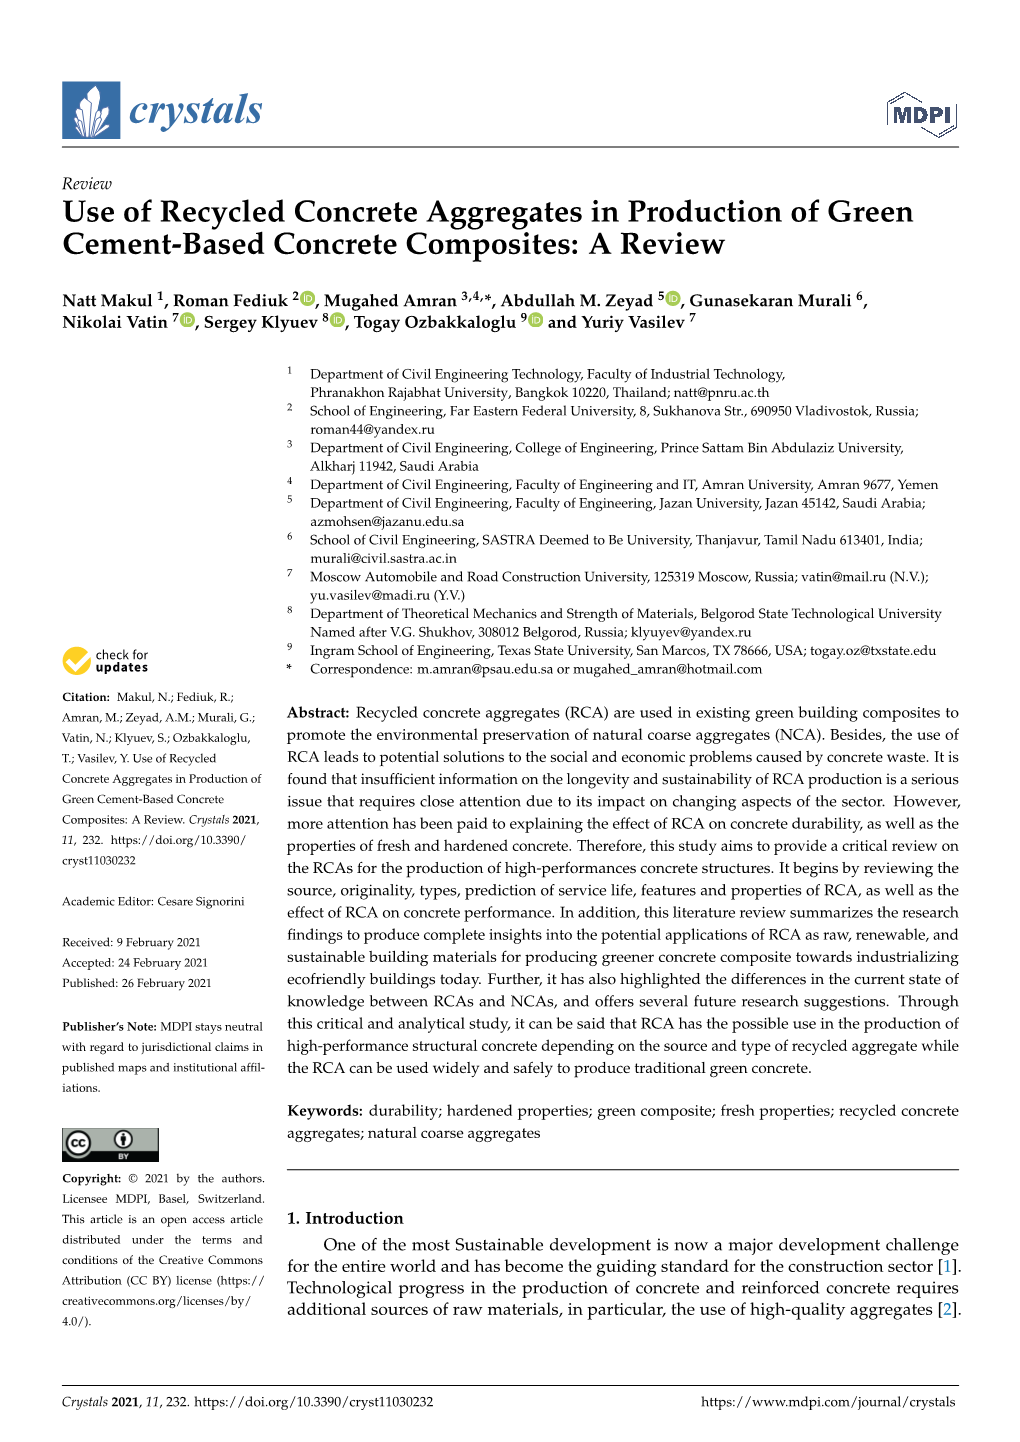 Use of Recycled Concrete Aggregates in Production of Green Cement-Based Concrete Composites: a Review